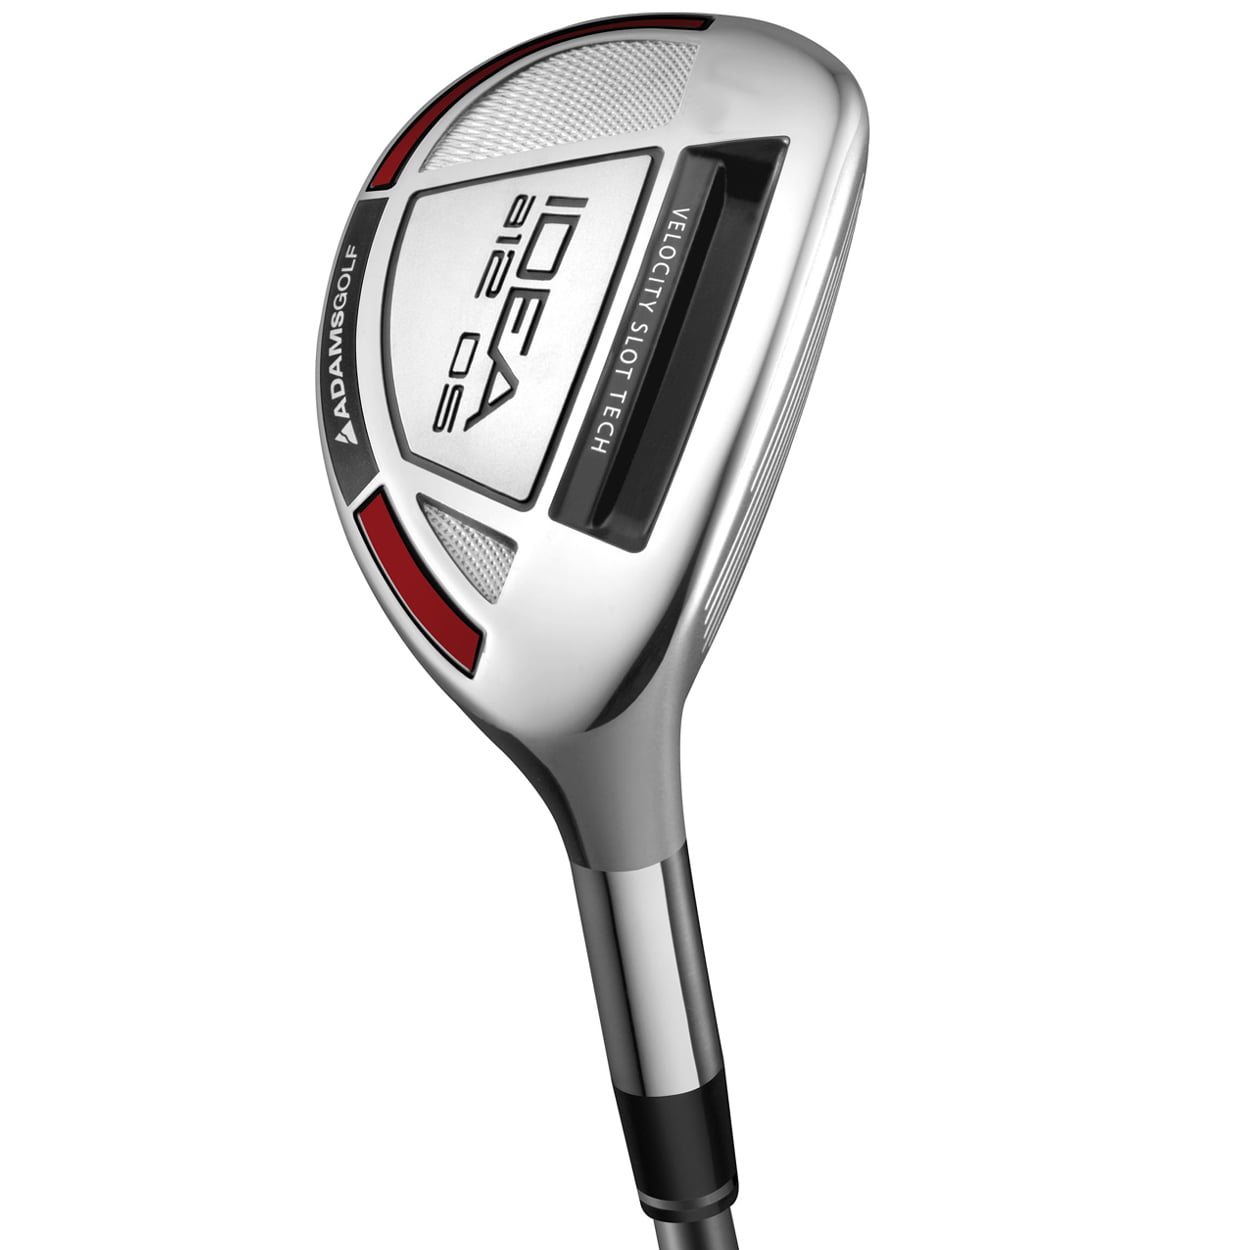 Are hybrid golf clubs  any good? – is it  a good brand?